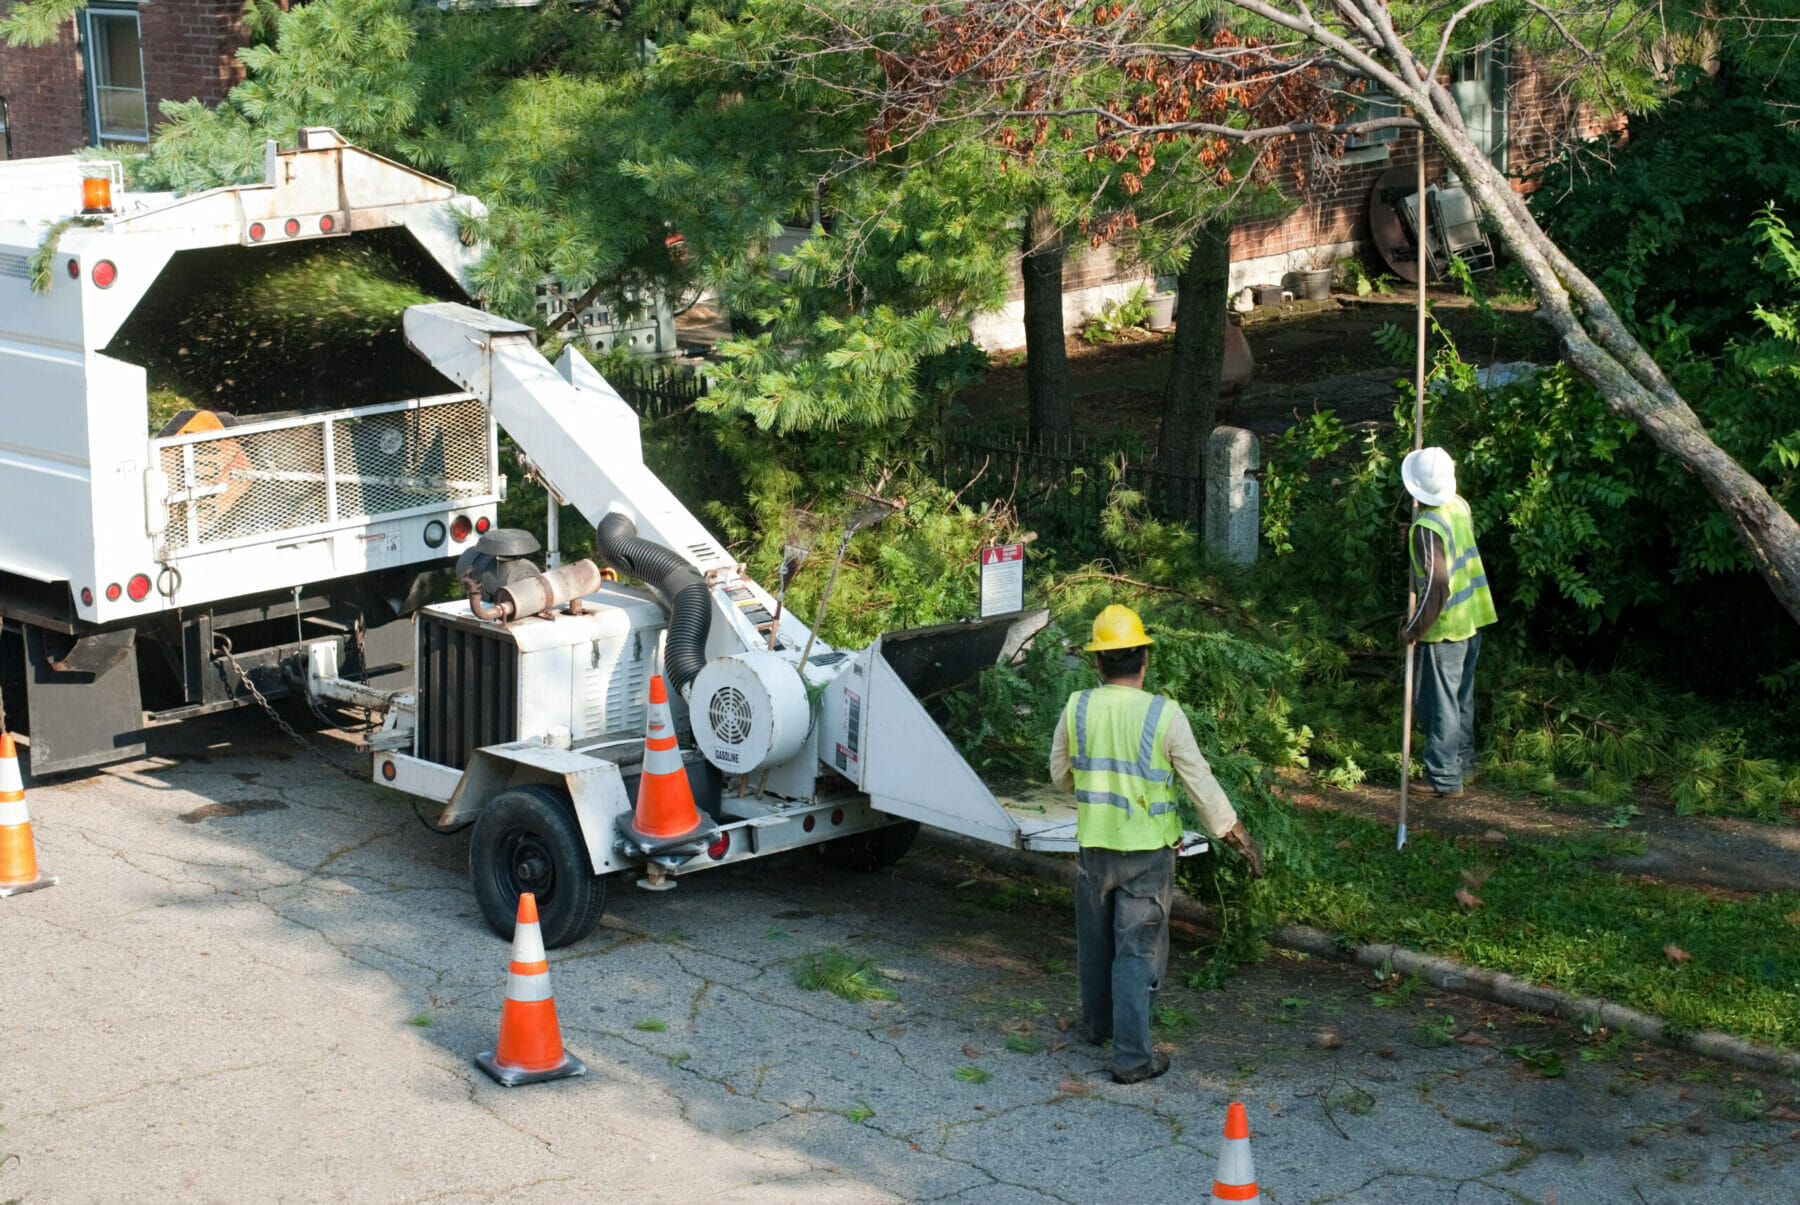 large wood chipper being used to clean up fallen limbs